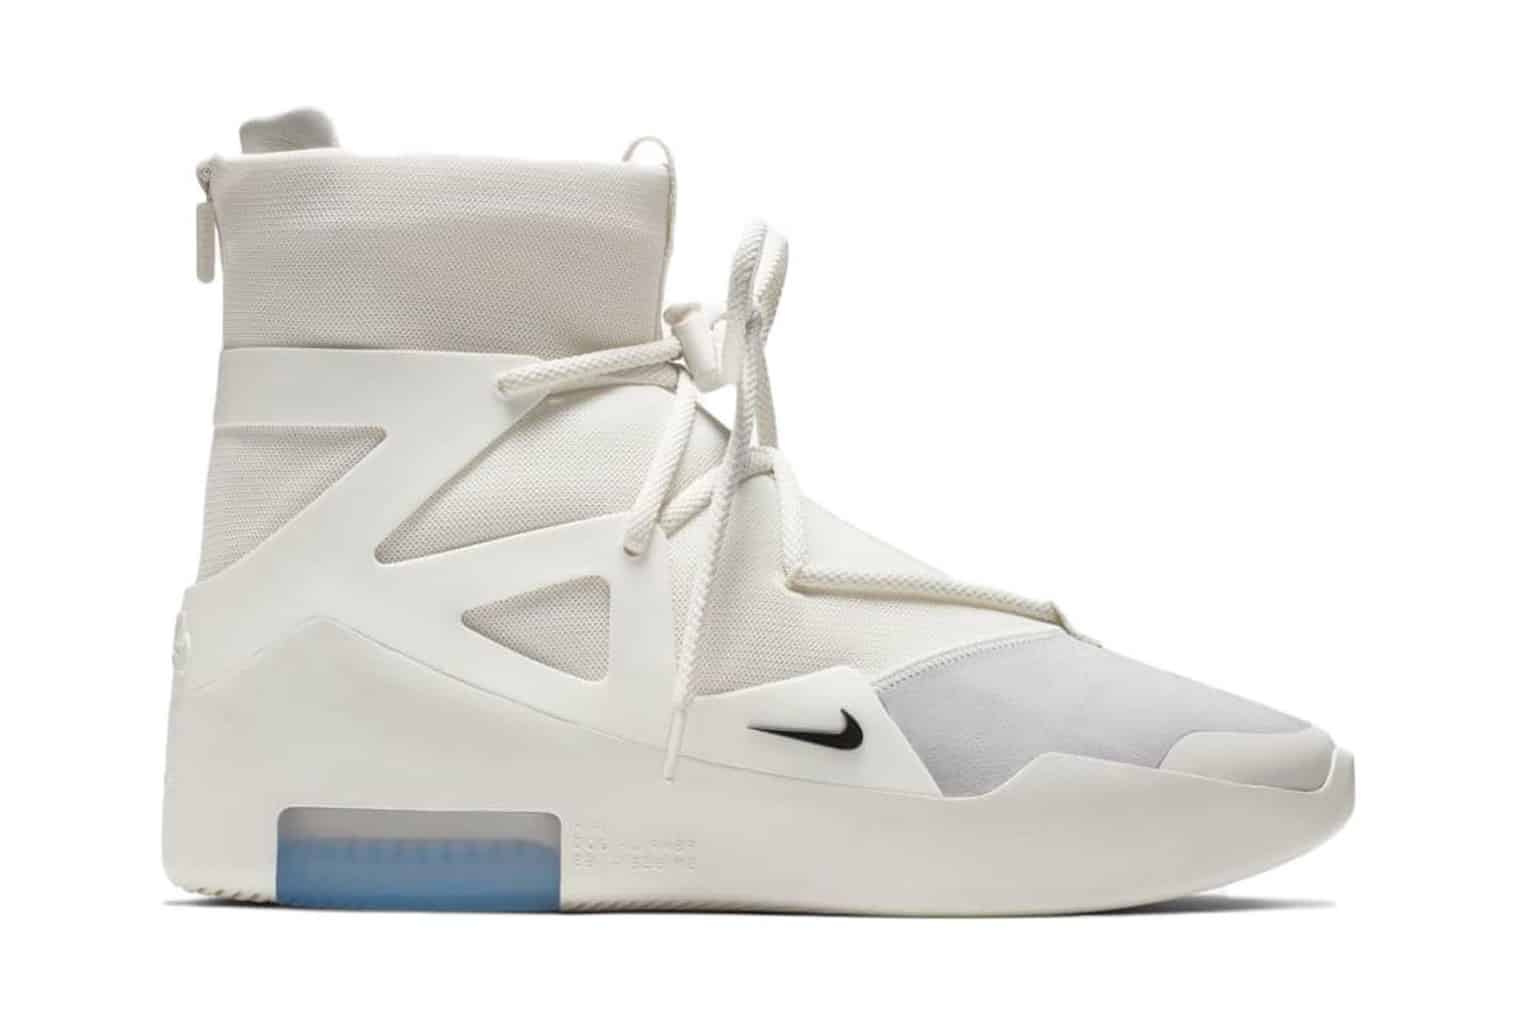 New Nike Air Fear of God 1 Colorway Release Date